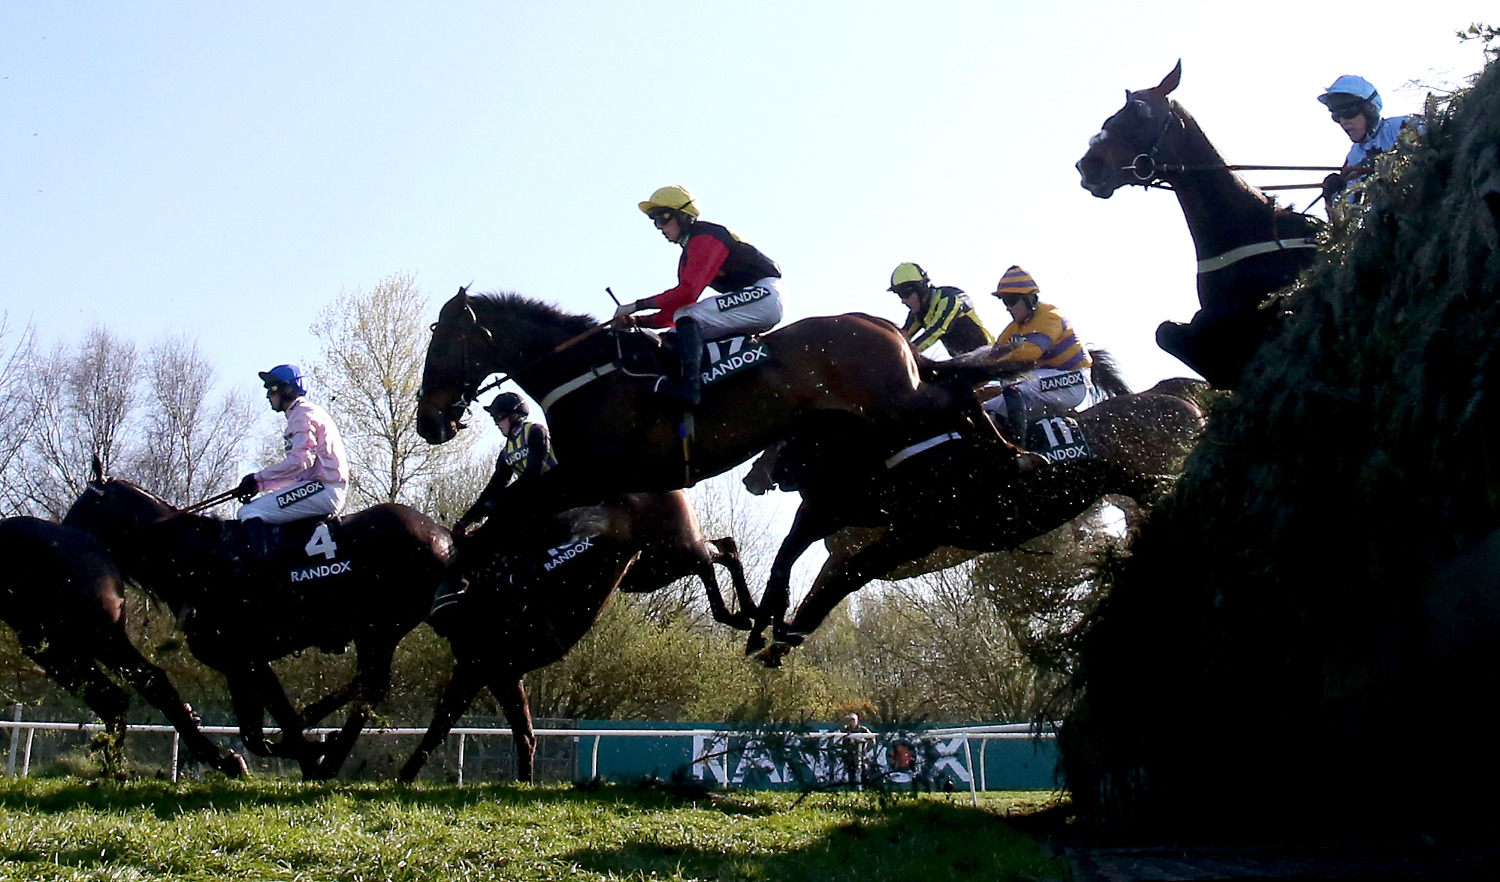 Is the Grand National bigger than the FIFA World Cup final?